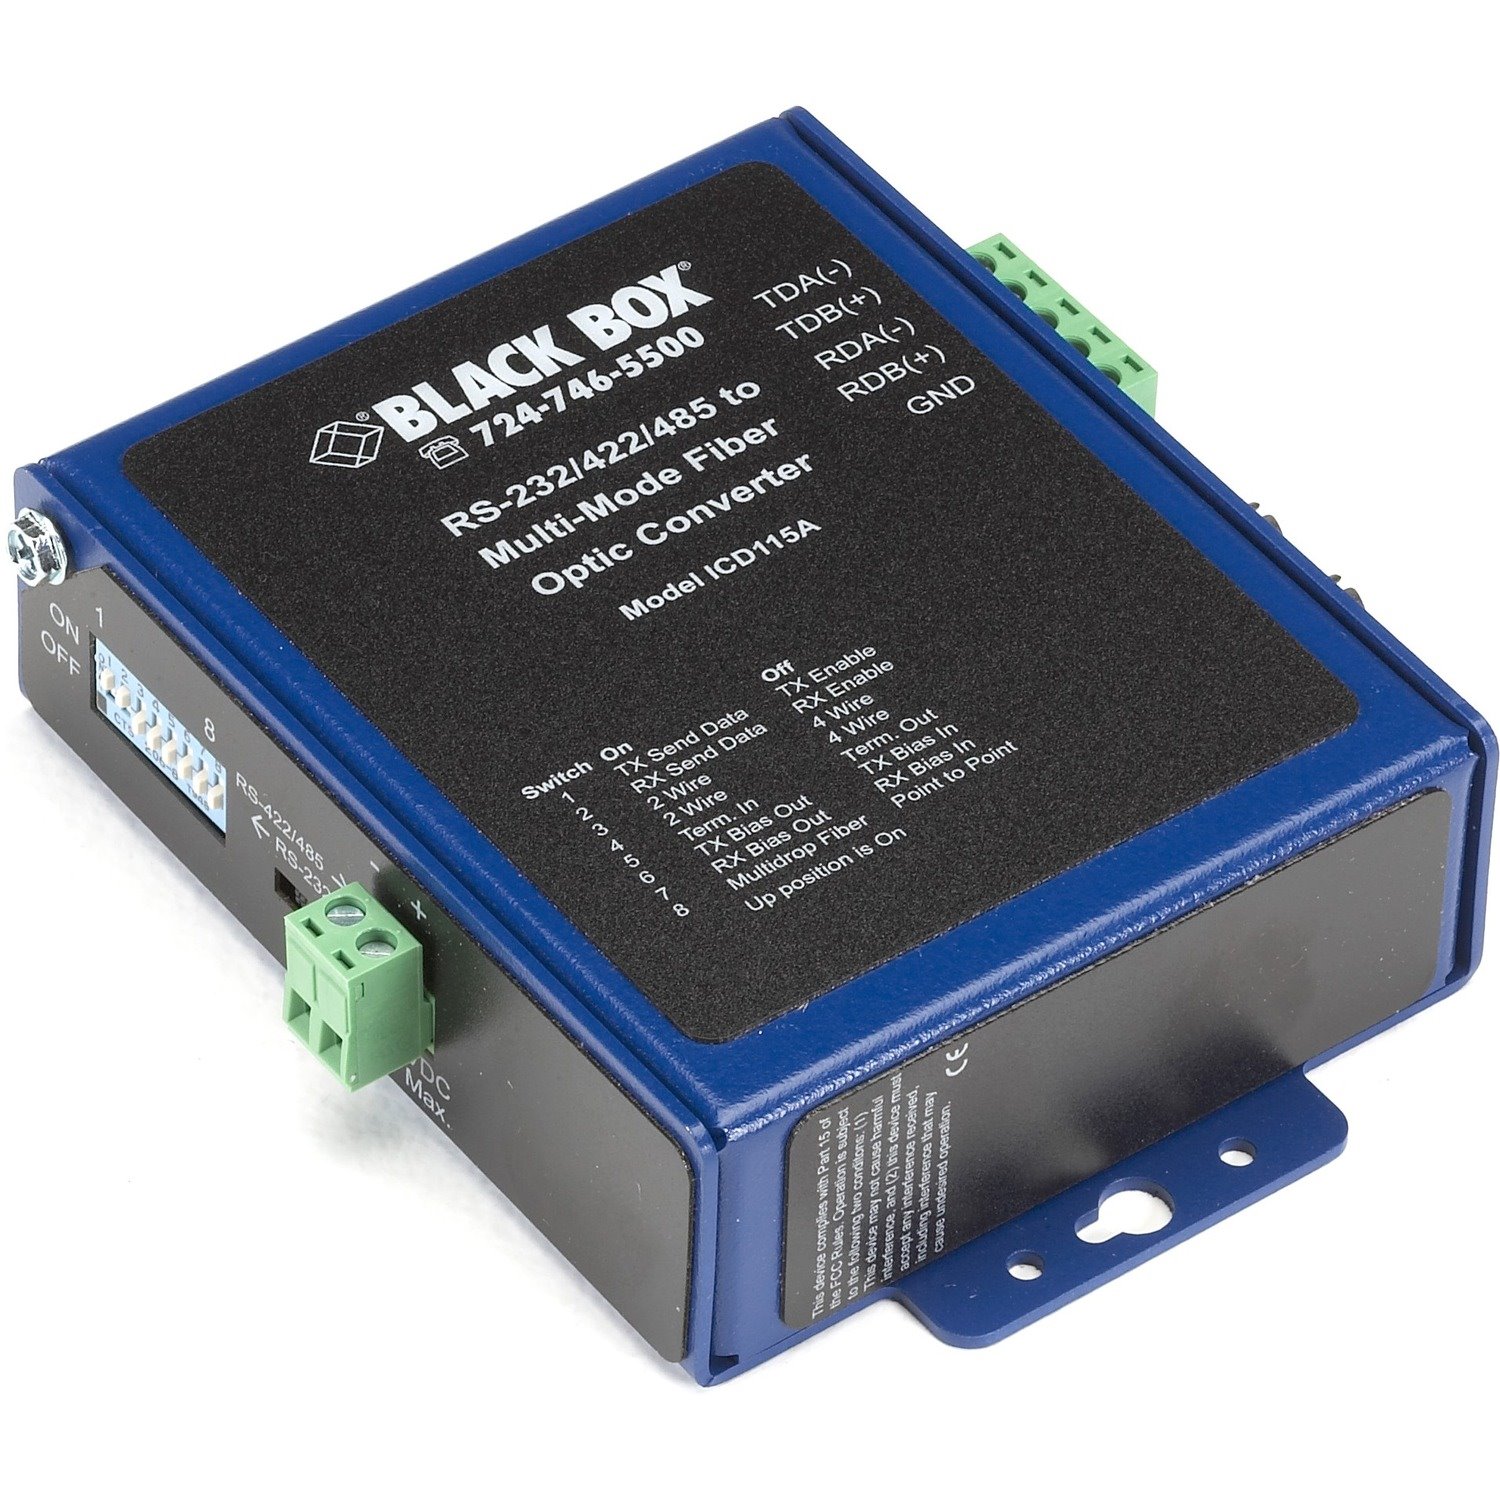 Black Box Industrial Opto-Isolated Serial to Fiber Multimode ST Converter